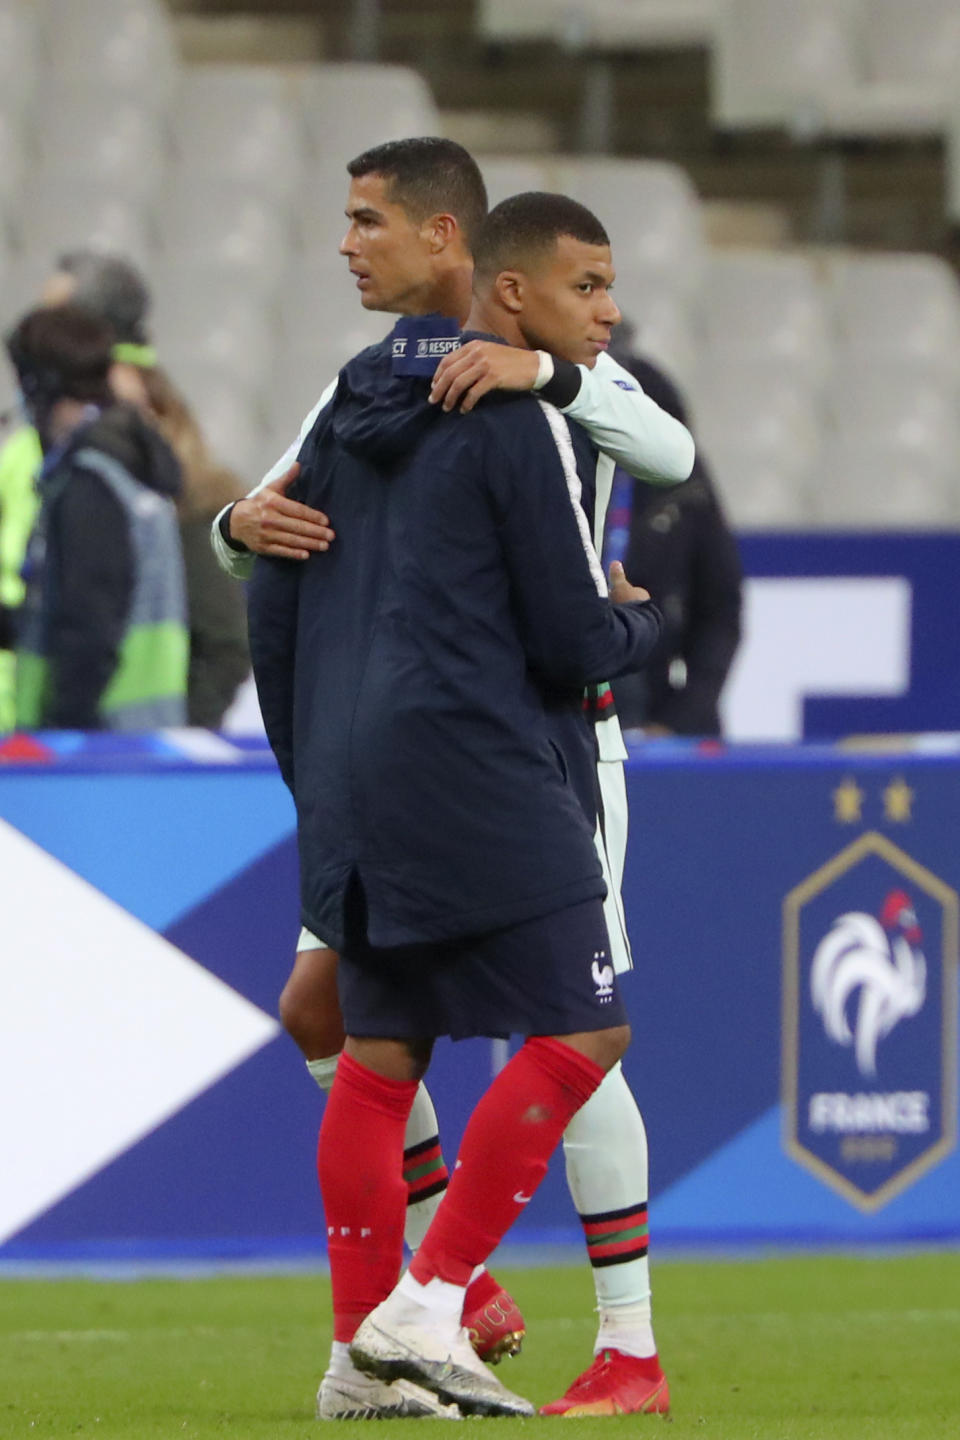 France's Kylian Mbappe and Portugal's Cristiano Ronaldo, left, greet each other at the end of the UEFA Nations League soccer match between France and Portugal at the Stade de France in Saint-Denis, north of Paris, France, Sunday, Oct. 11, 2020. (AP Photo/Thibault Camus)